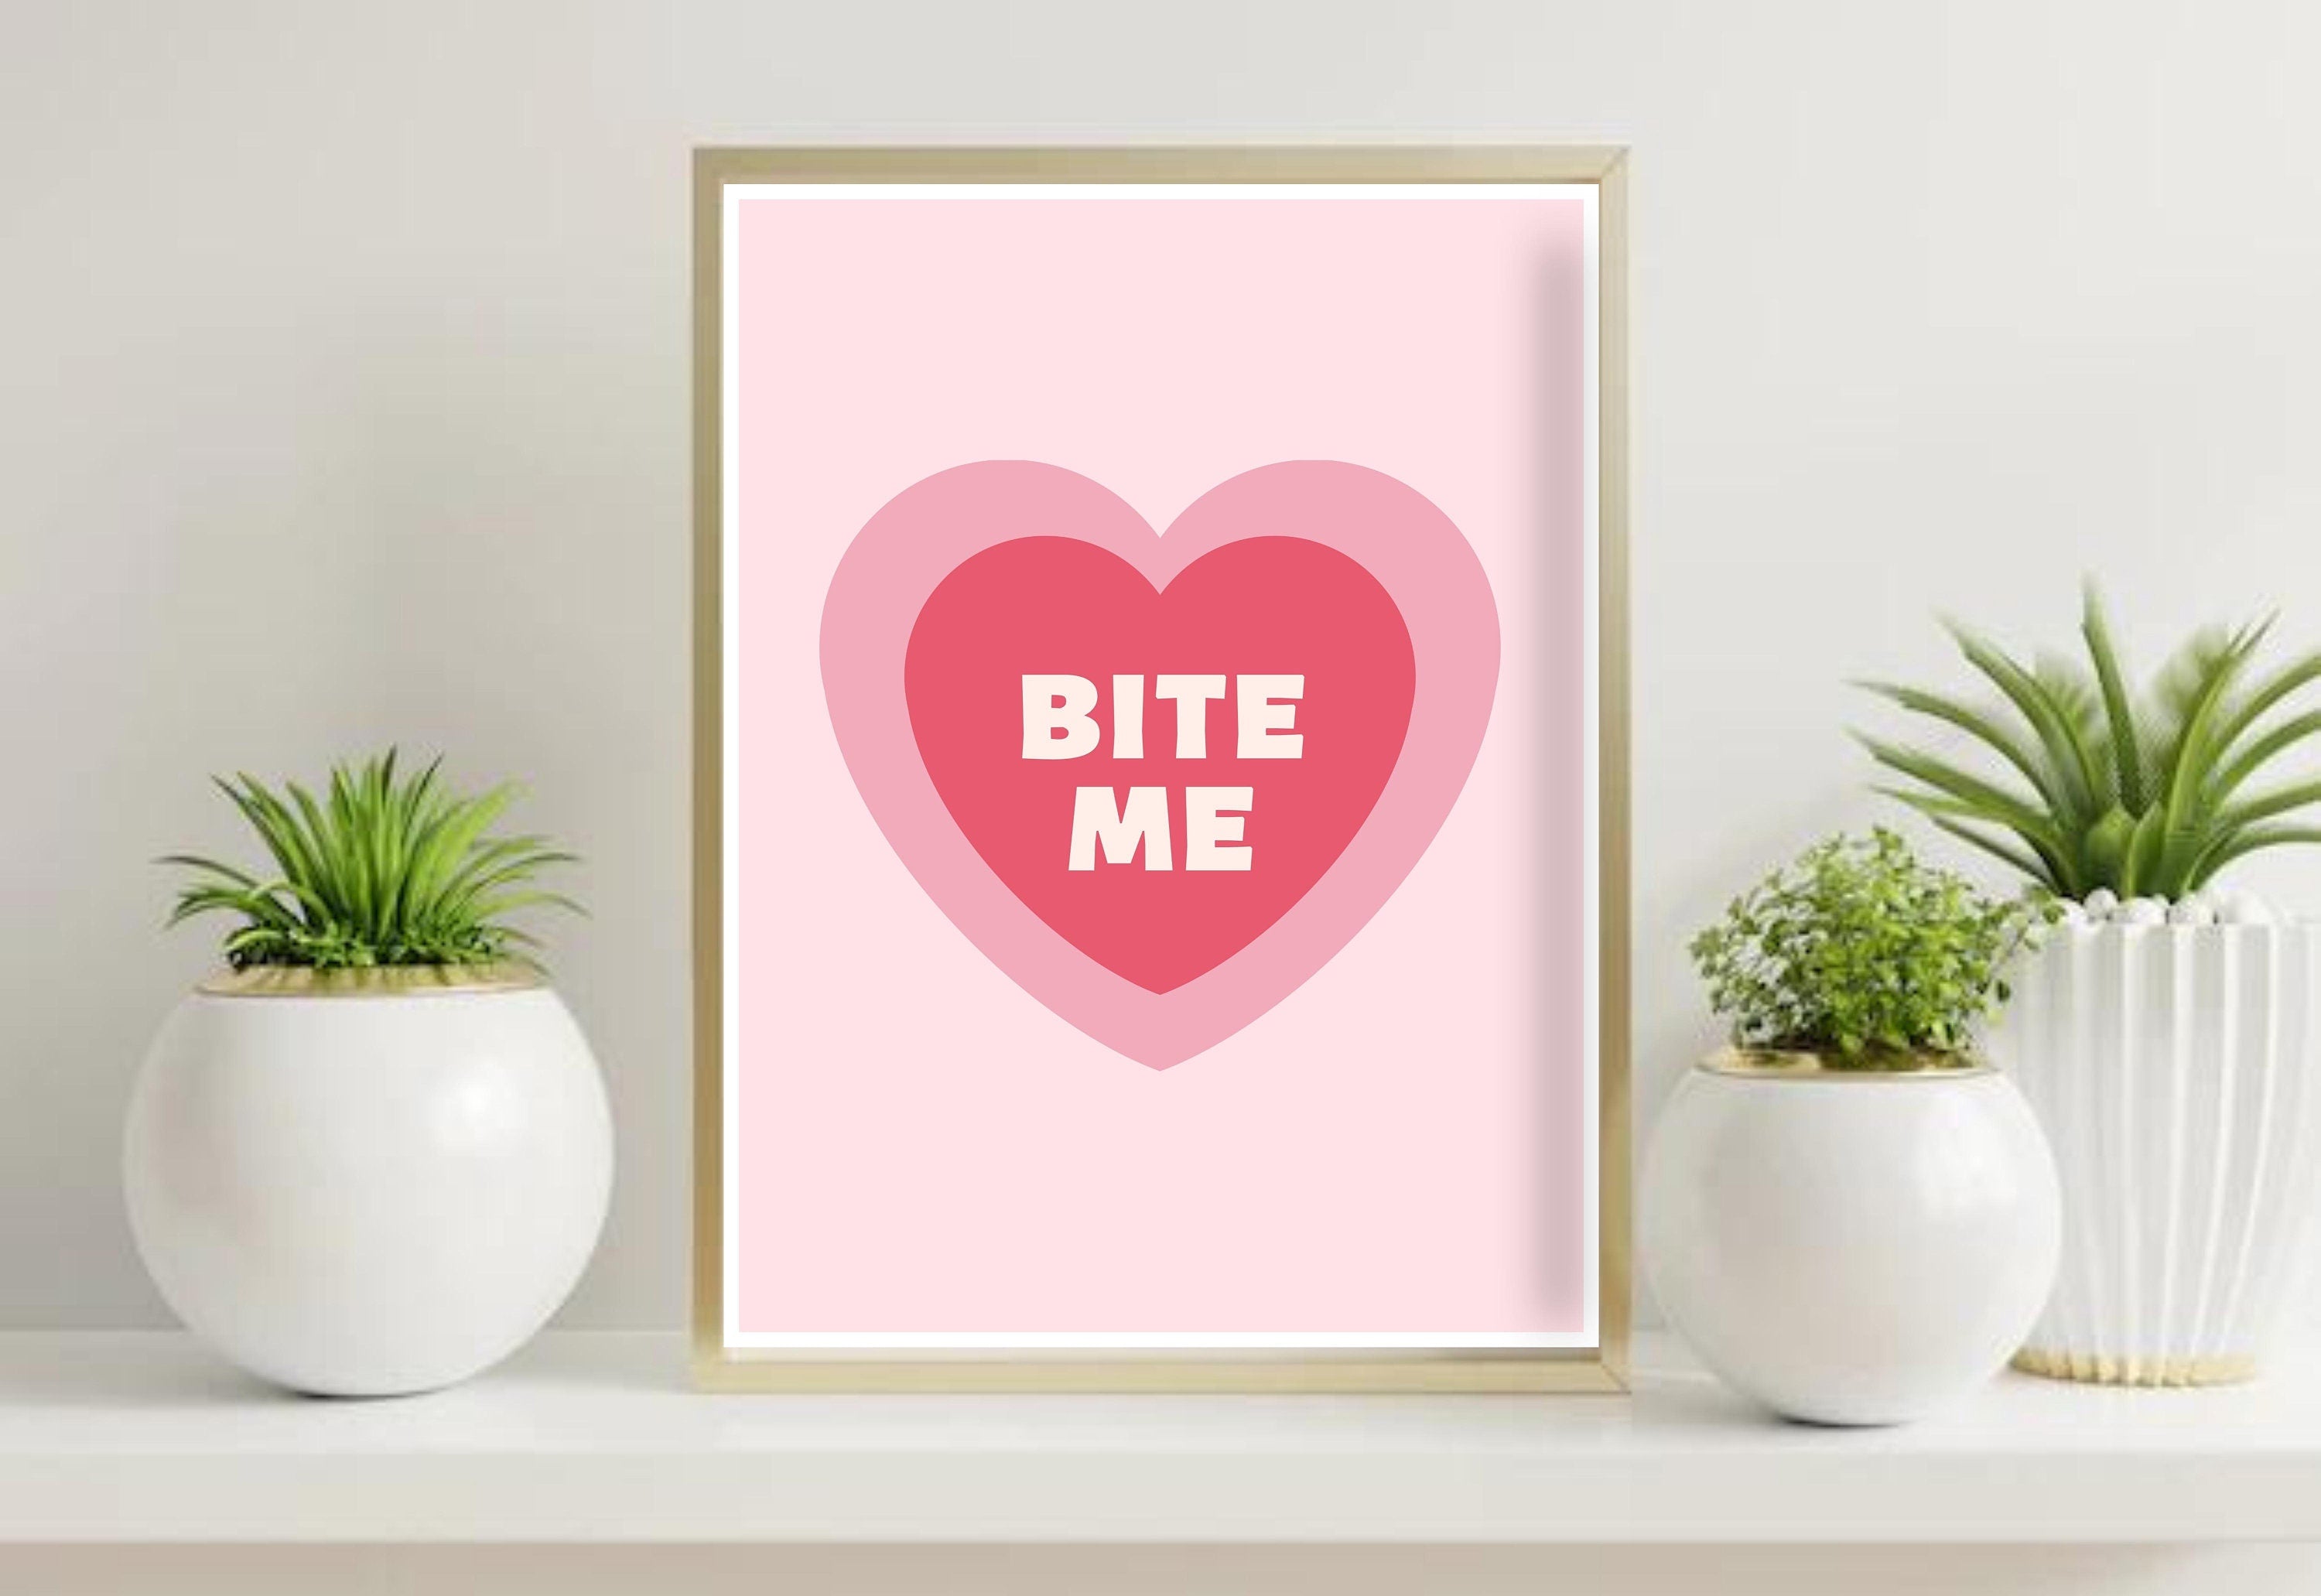 The 'Bite Me Art Print' displayed in a modern living room setting with vibrant colors.